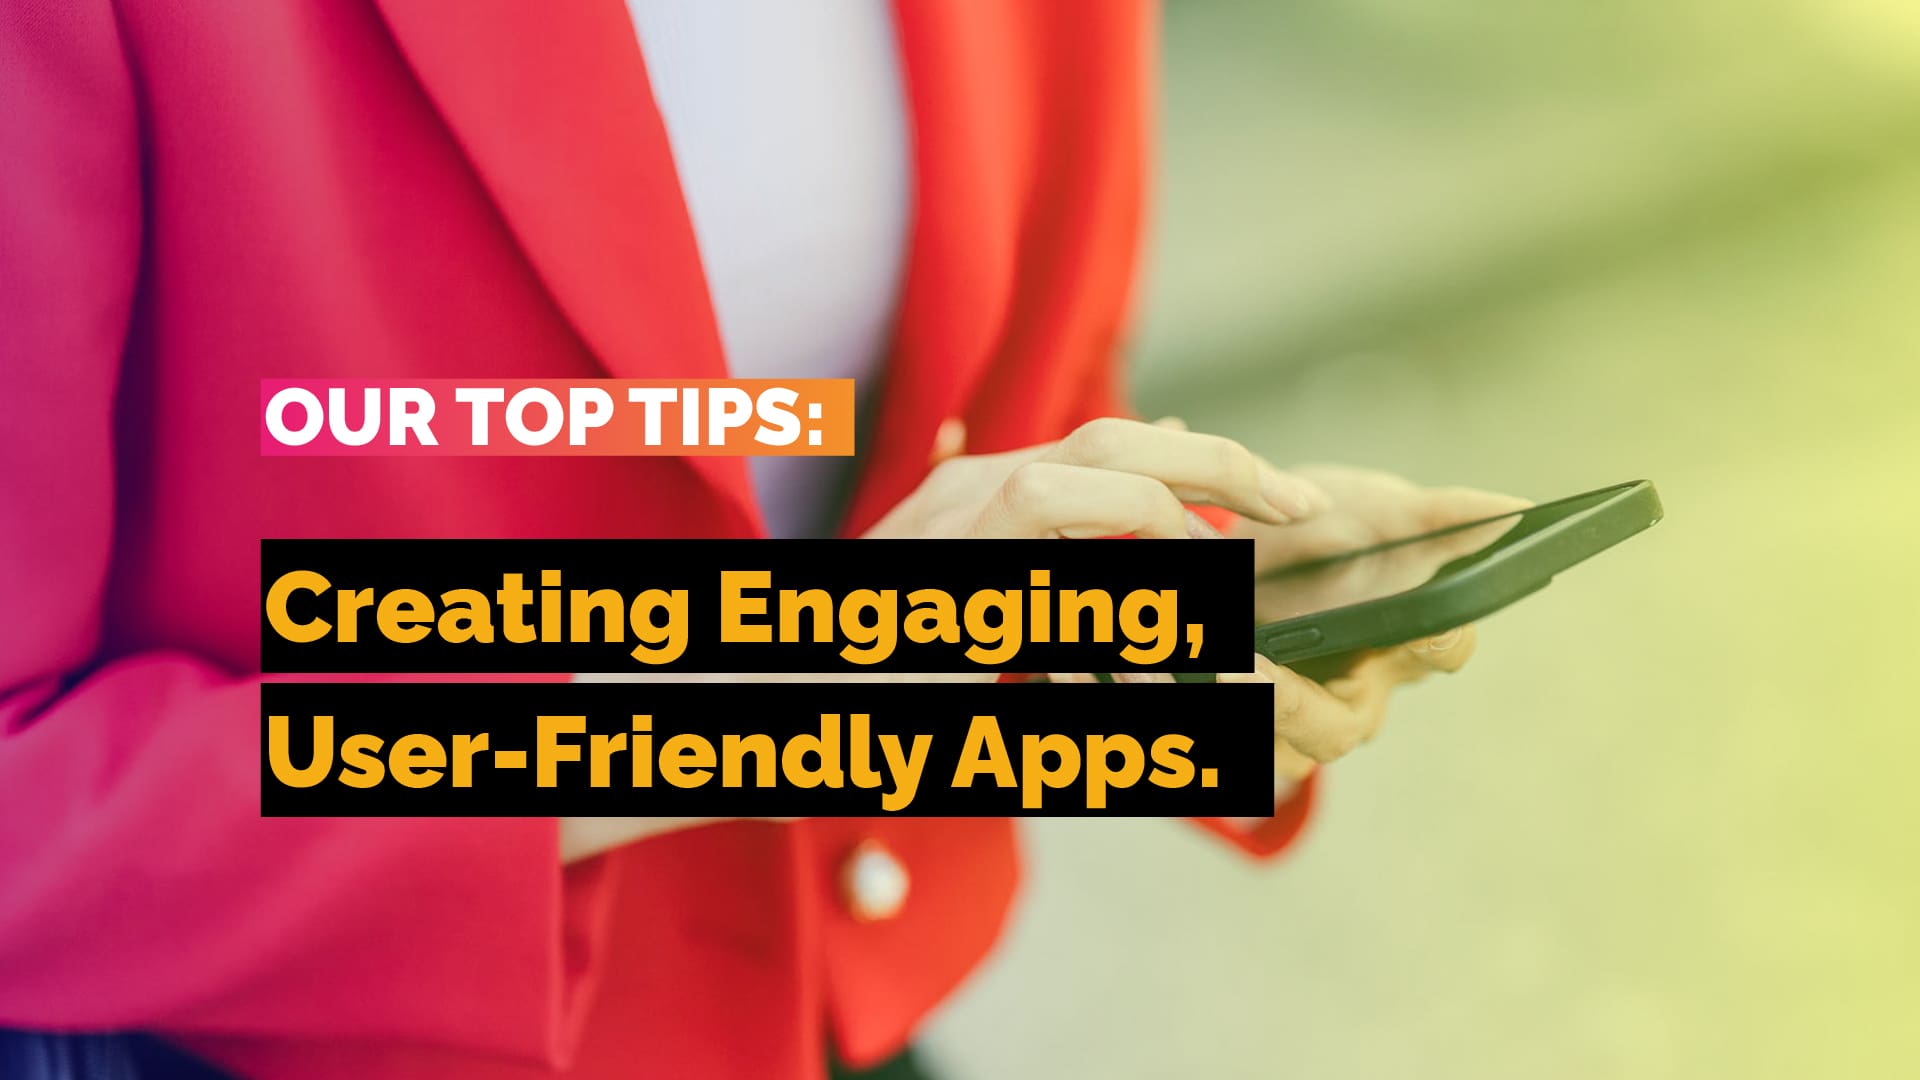 Top Tips to Create Engaging, User-Friendly Apps